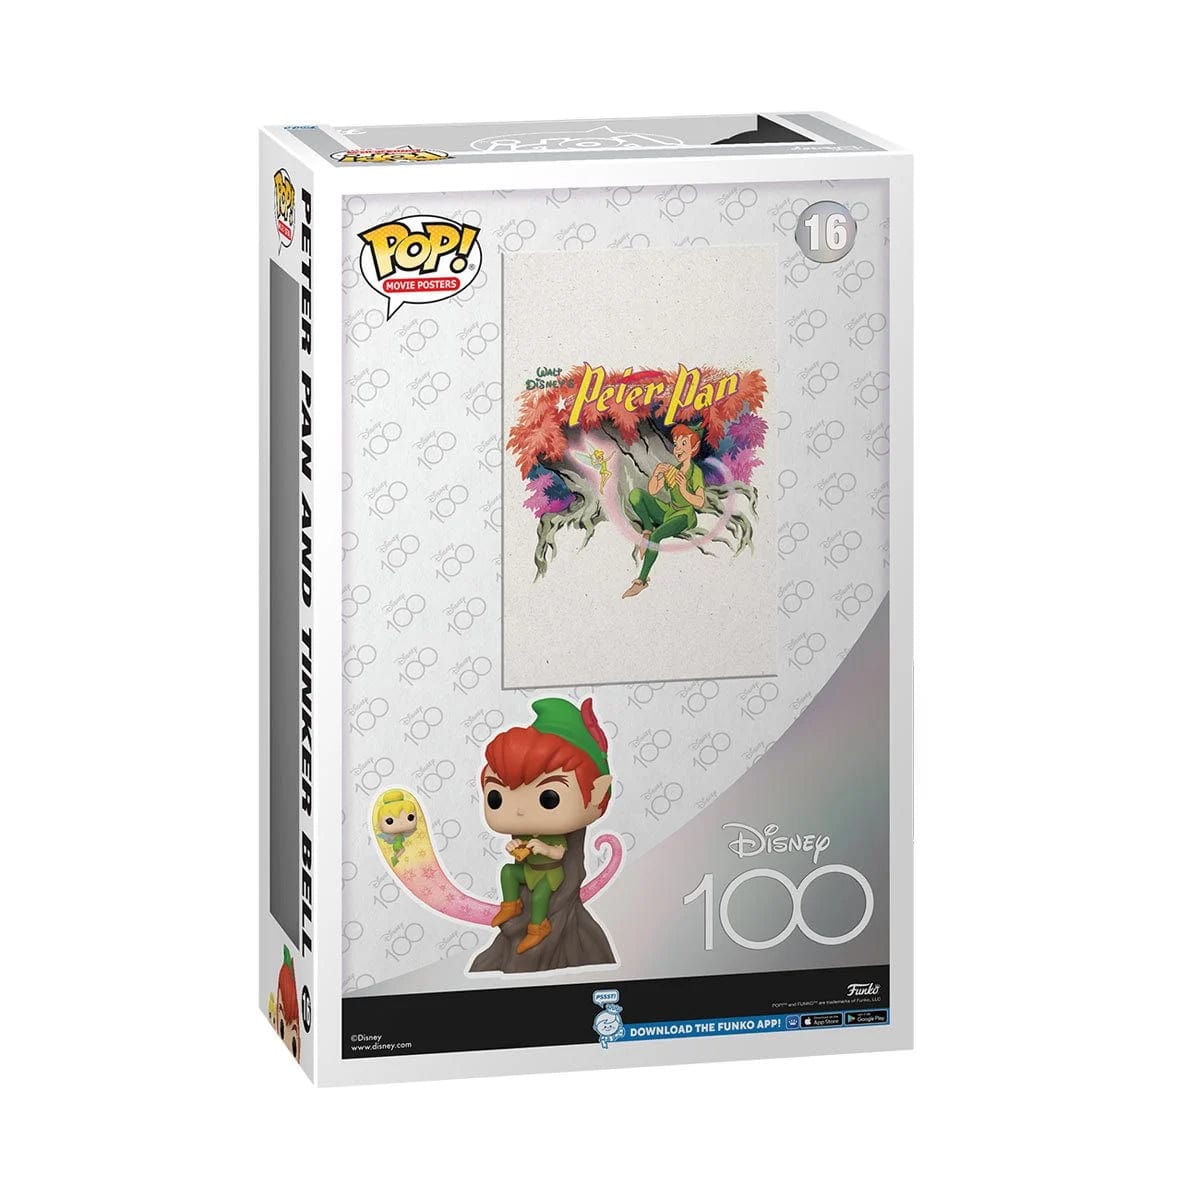 Funko POP! Peter Pan Pop! Movie Poster with Case Disney 100th Anniversary Edition 